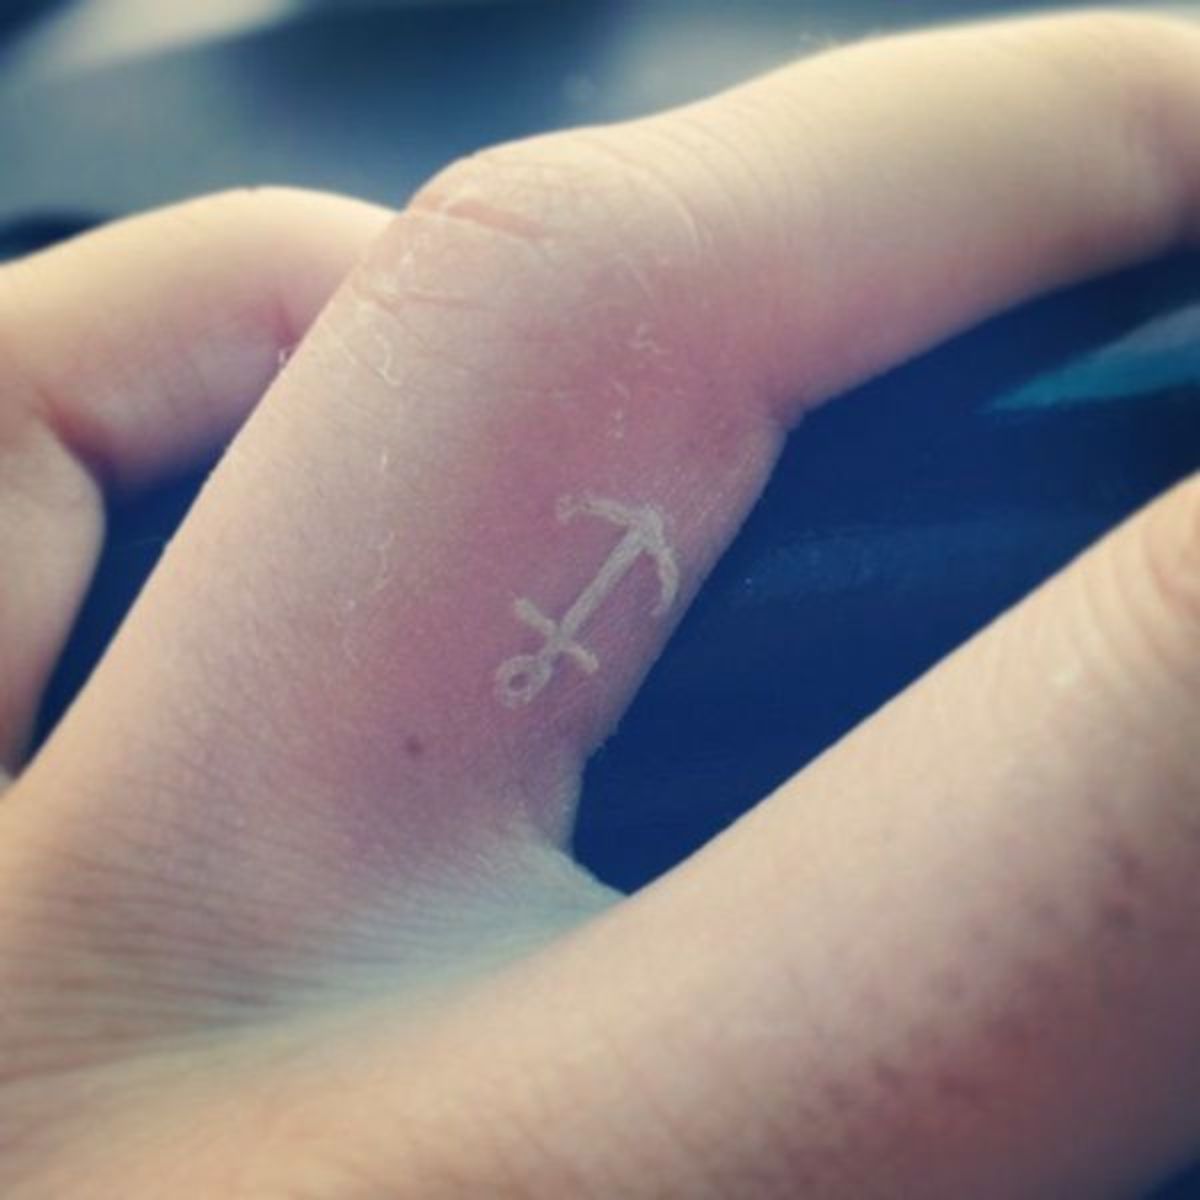 Anchor tattoo at the finger.